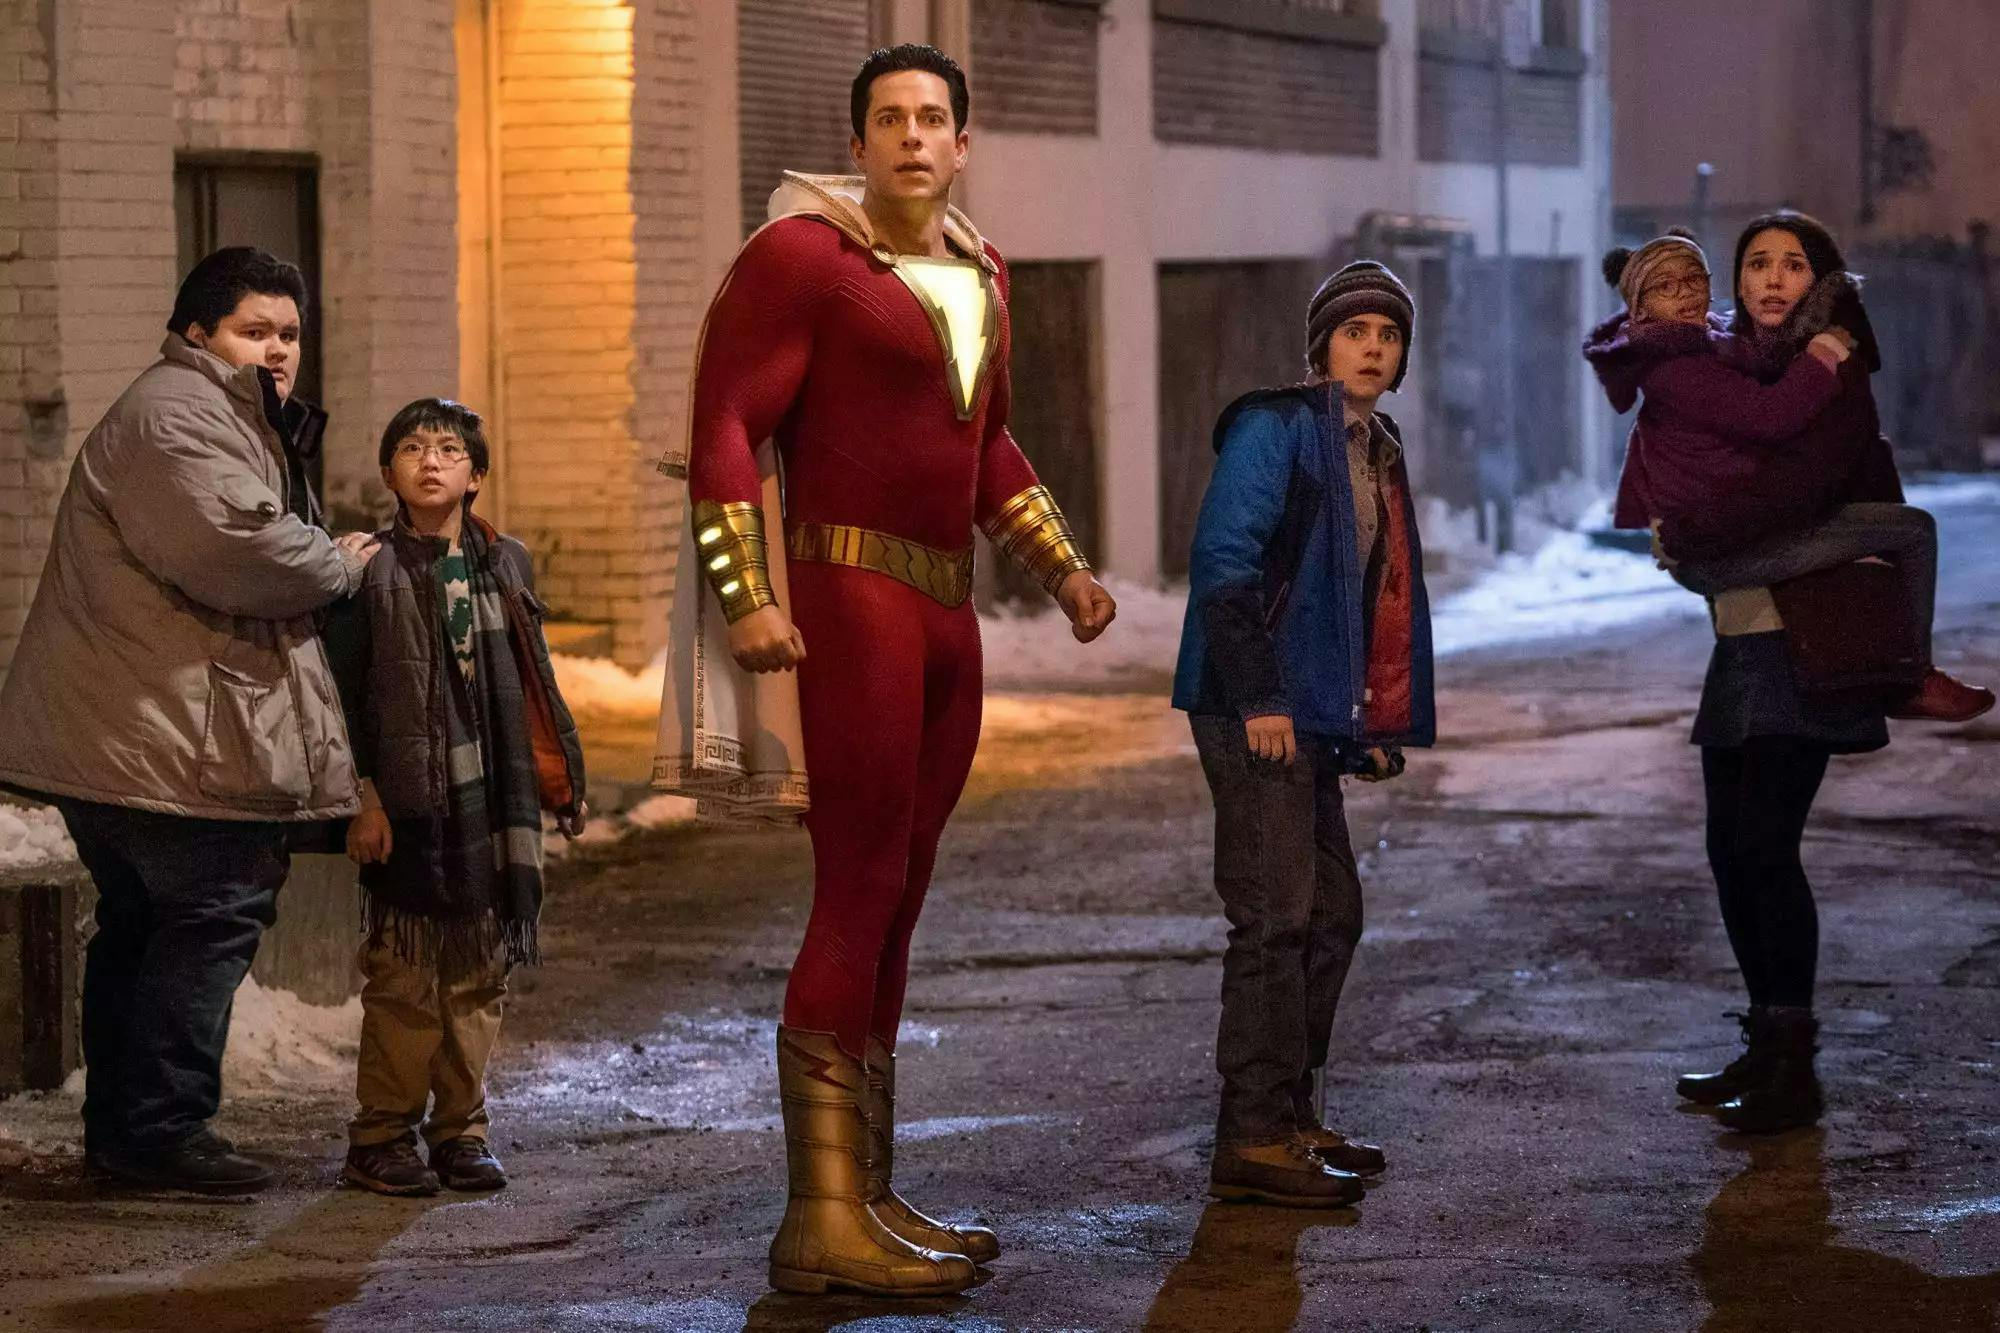 Shazam!: A Heartwarming and Humorous Addition to the DC Extended Universe